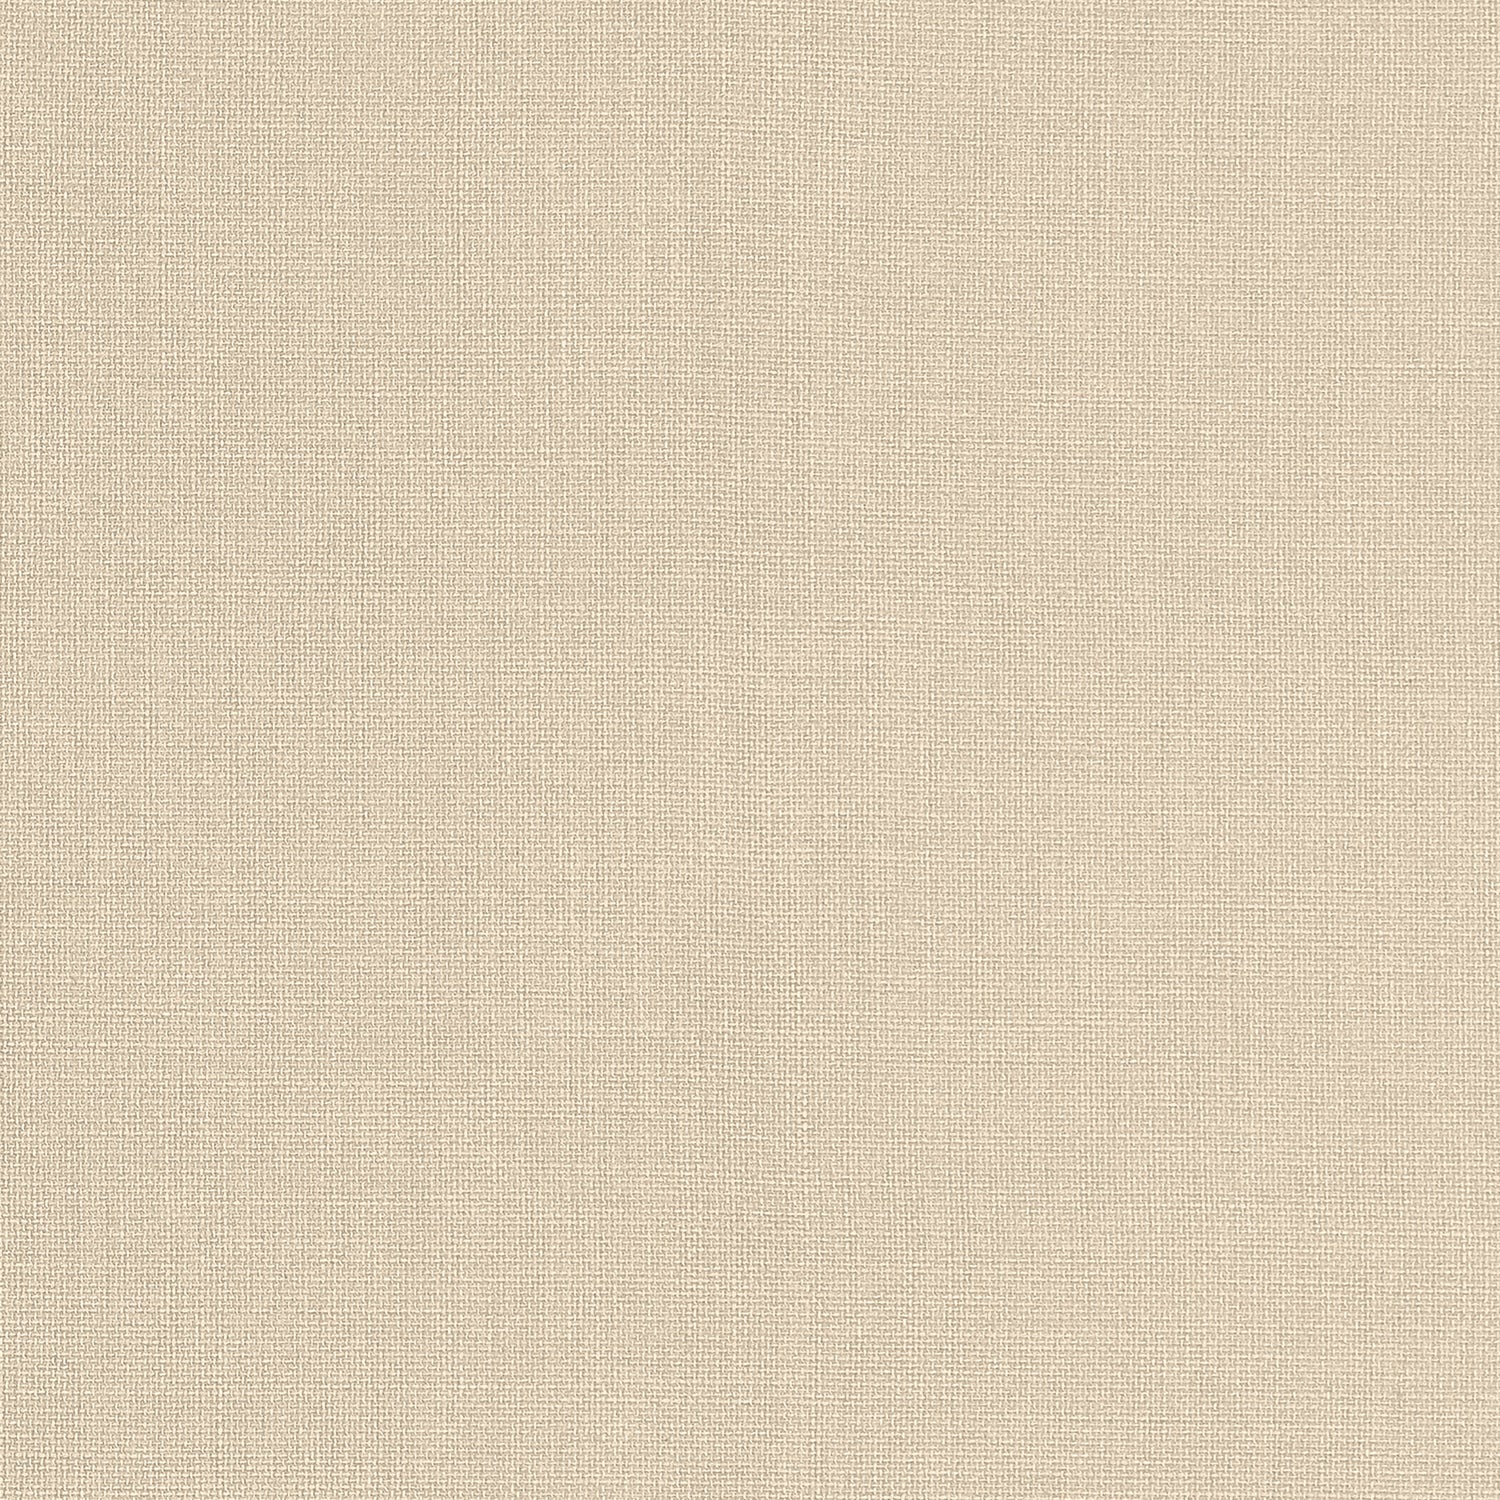 Brynn fabric in sand color - pattern number W81679 - by Thibaut in the Locale collection